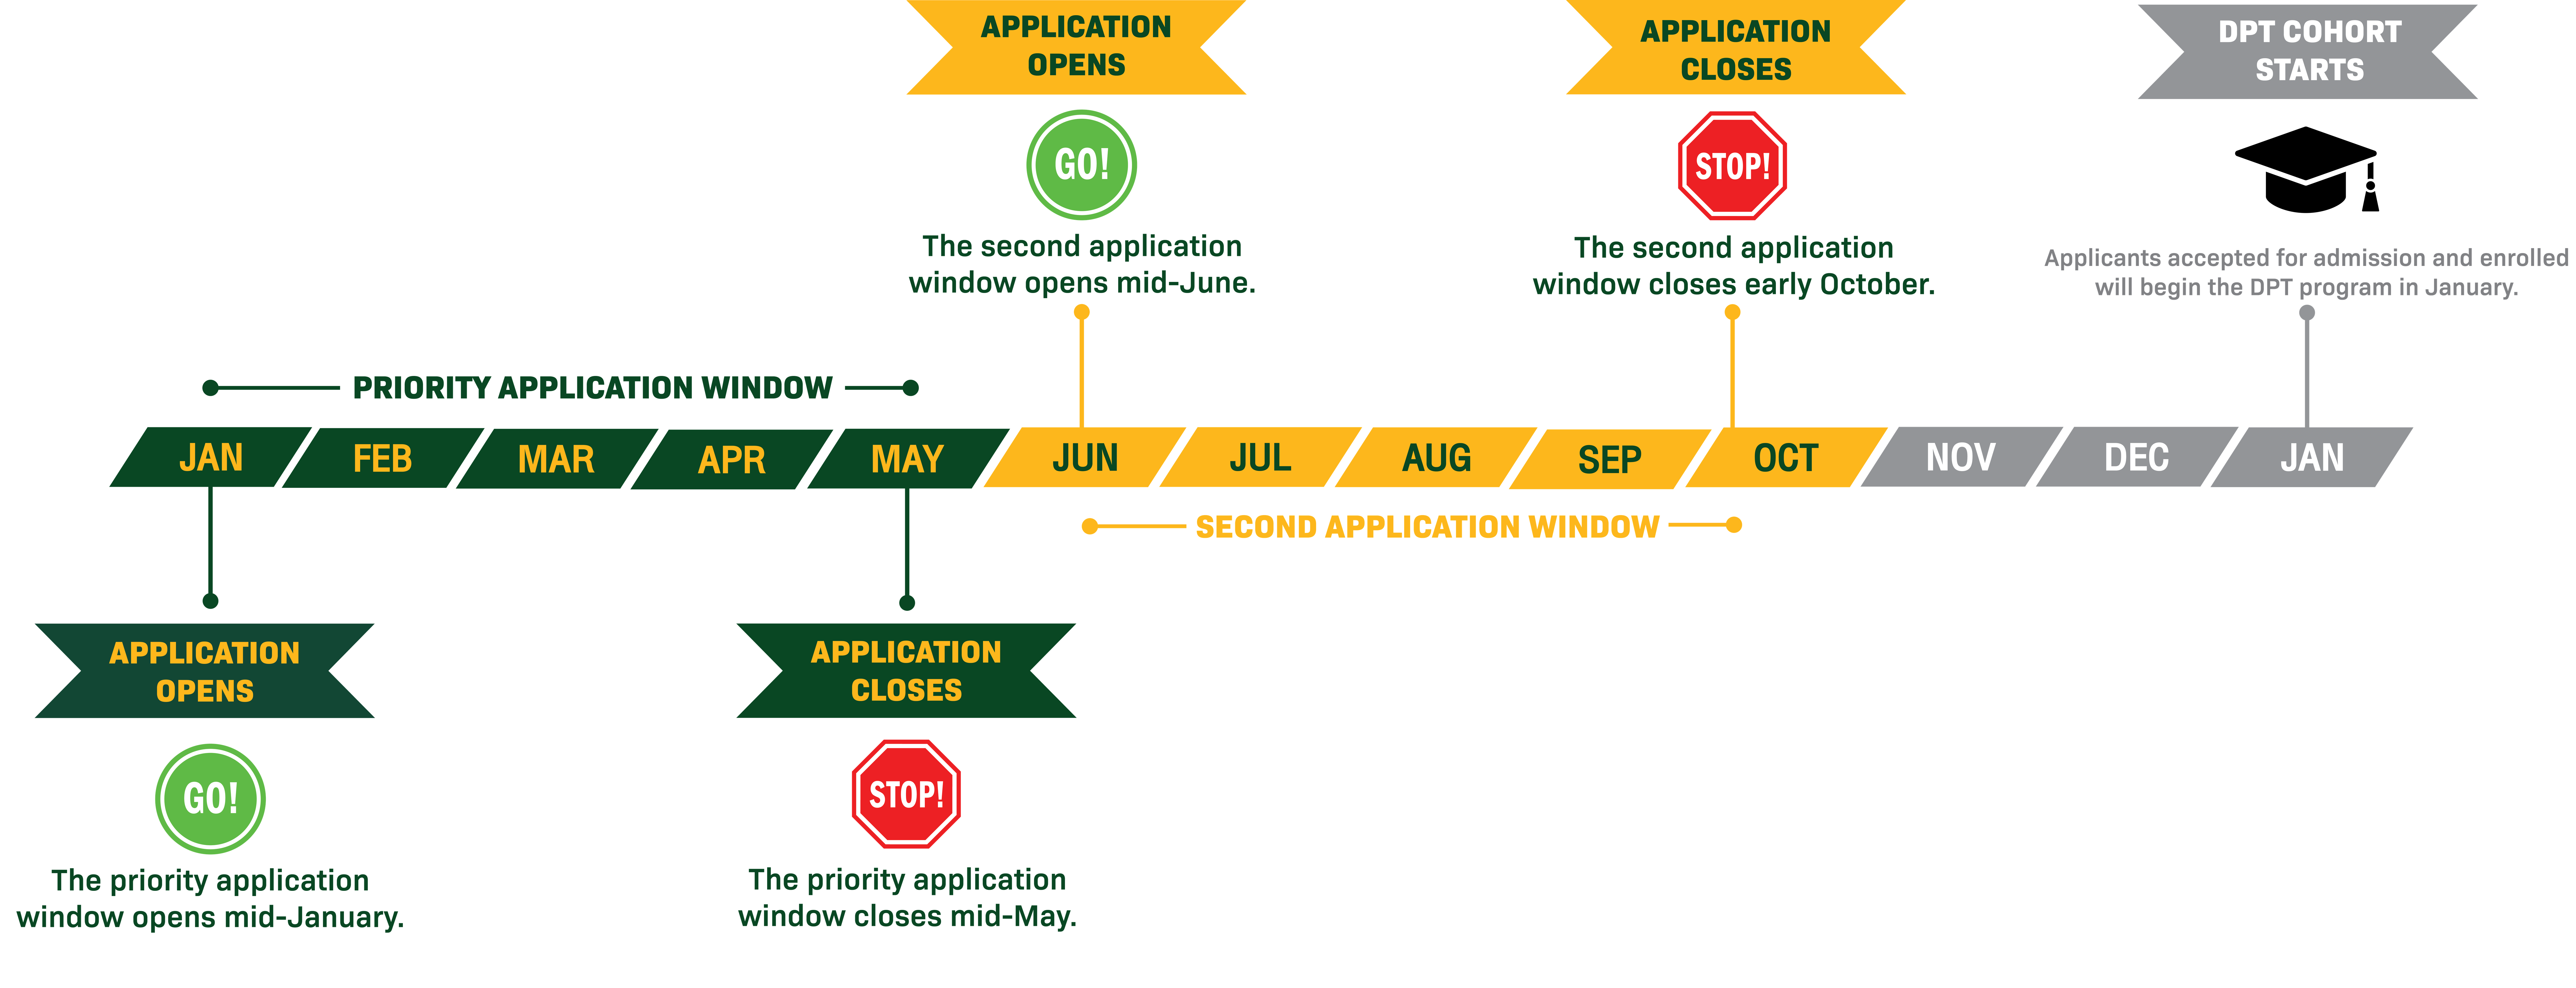 DPT Application Cycle